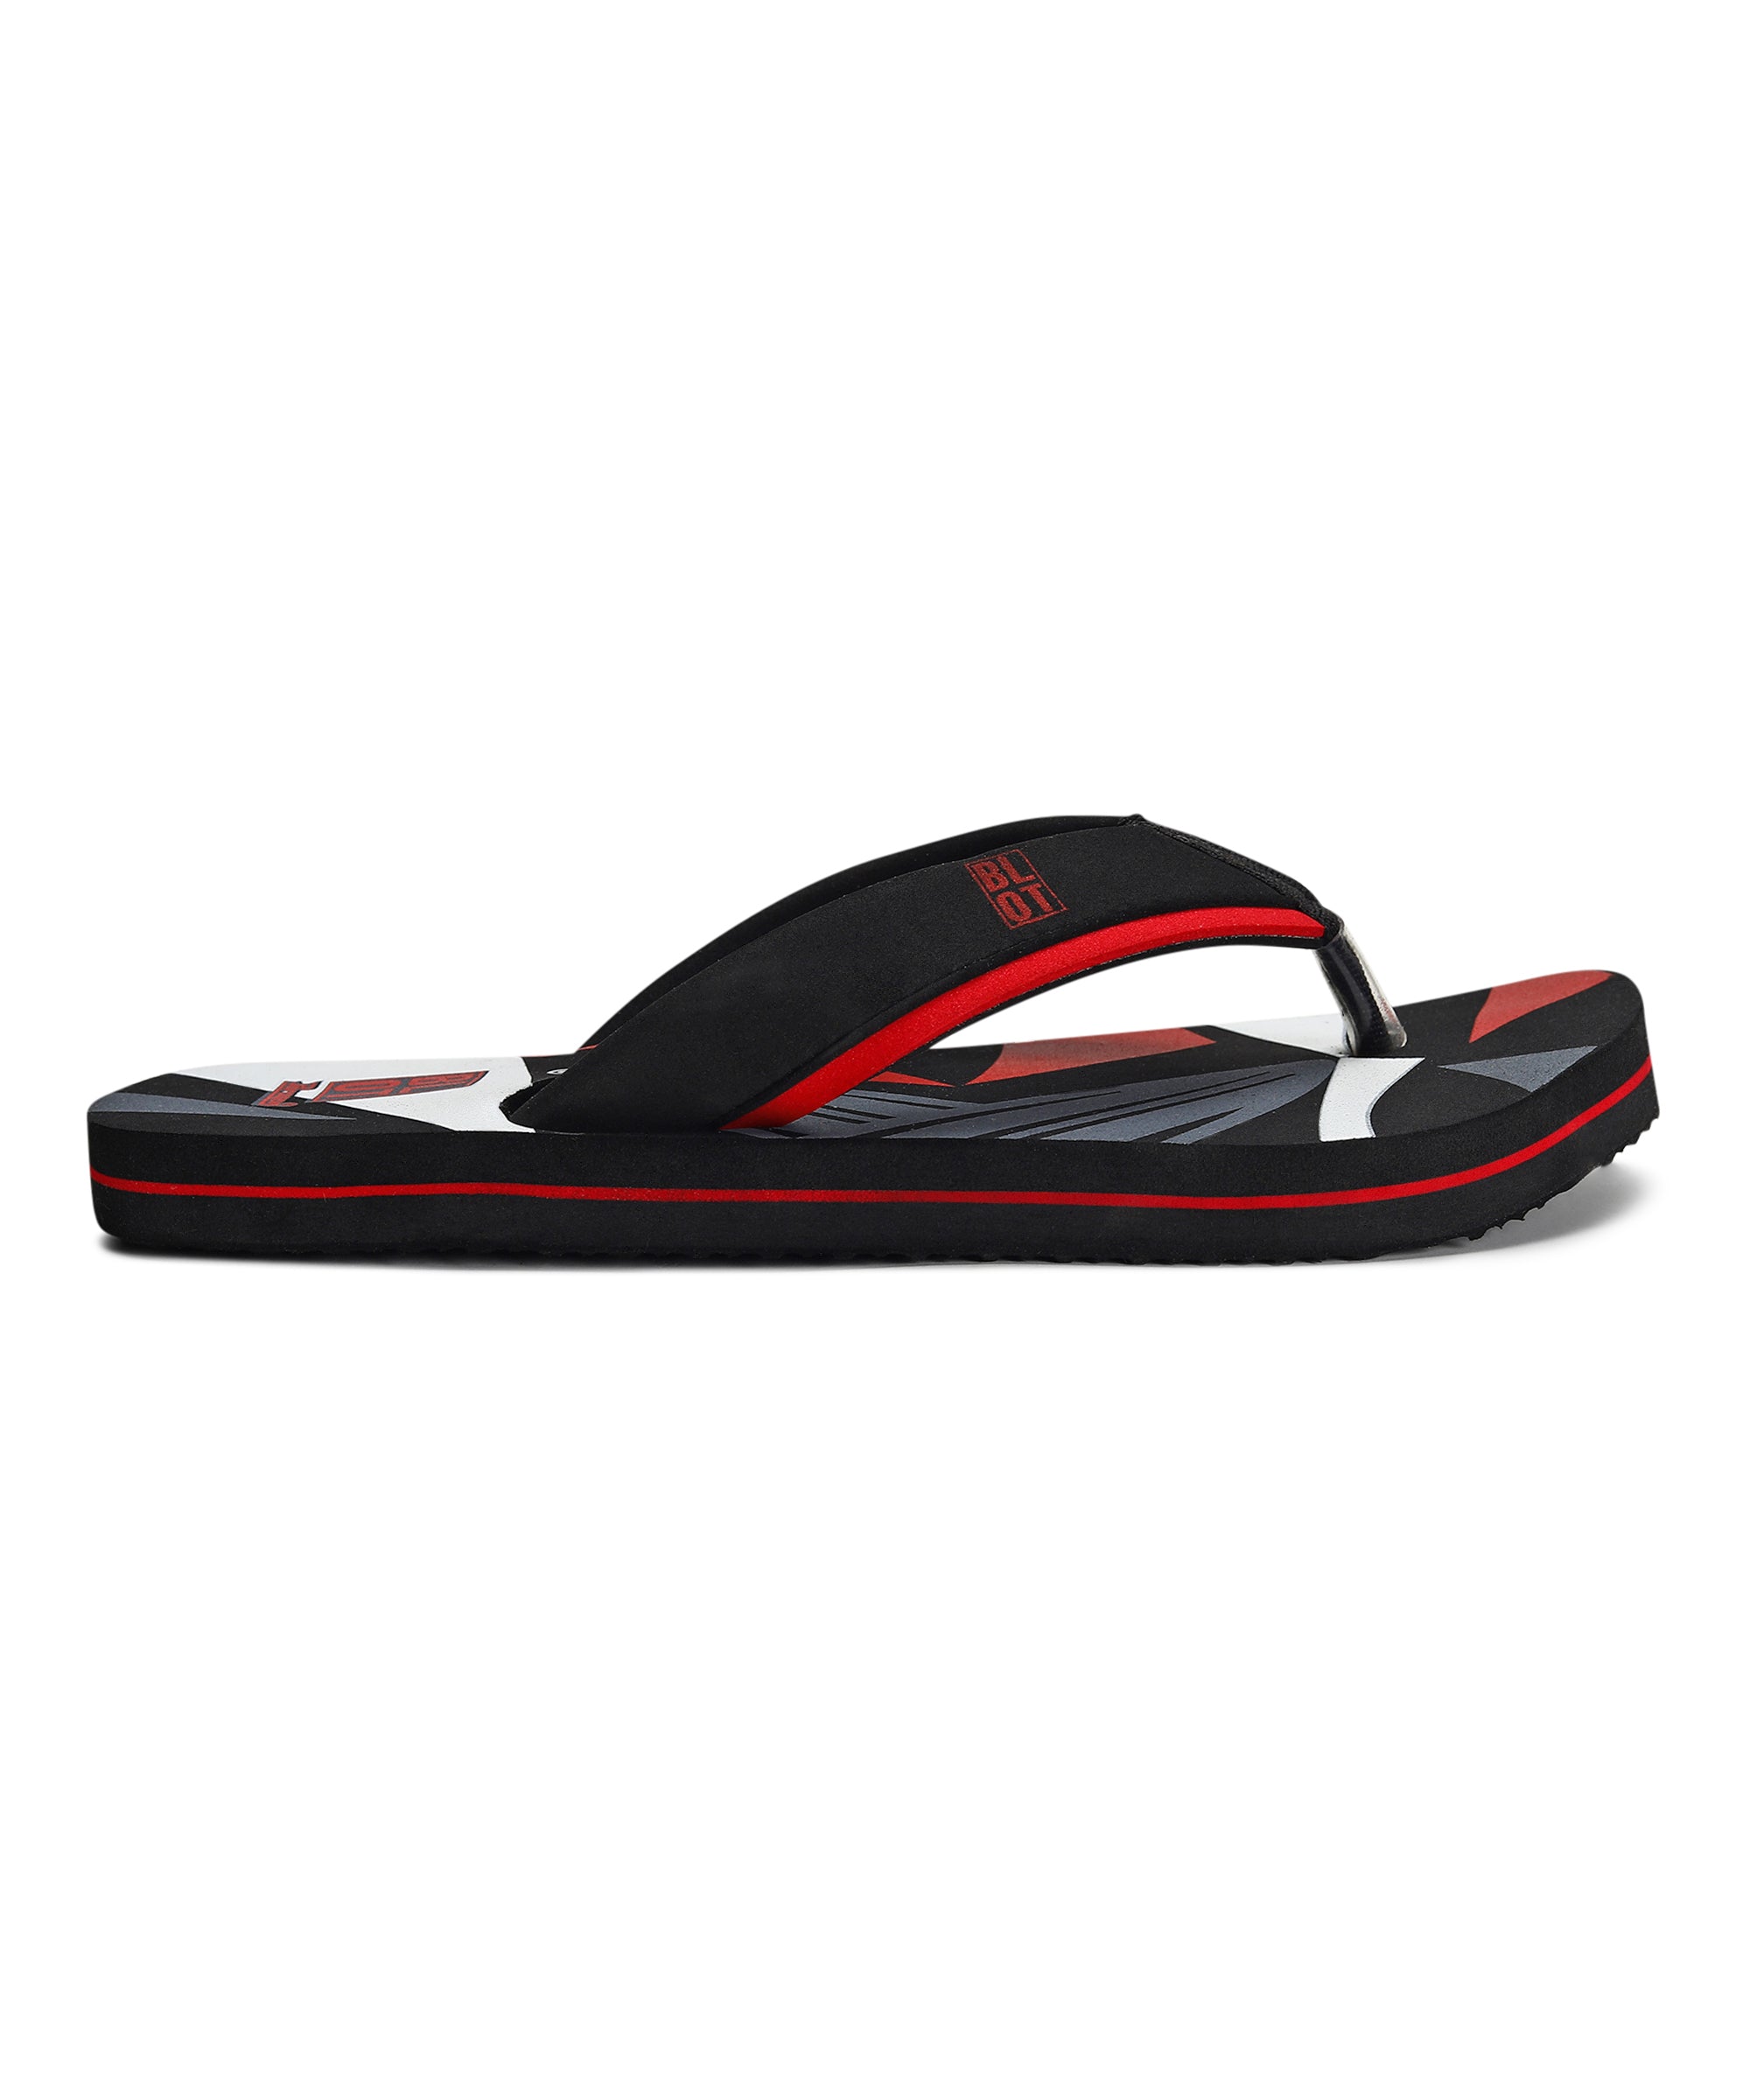 Paragon Blot K3305G Men Stylish Lightweight Flipflops | Casual &amp; Comfortable Daily-wear Slippers for Indoor &amp; Outdoor | For Everyday Use